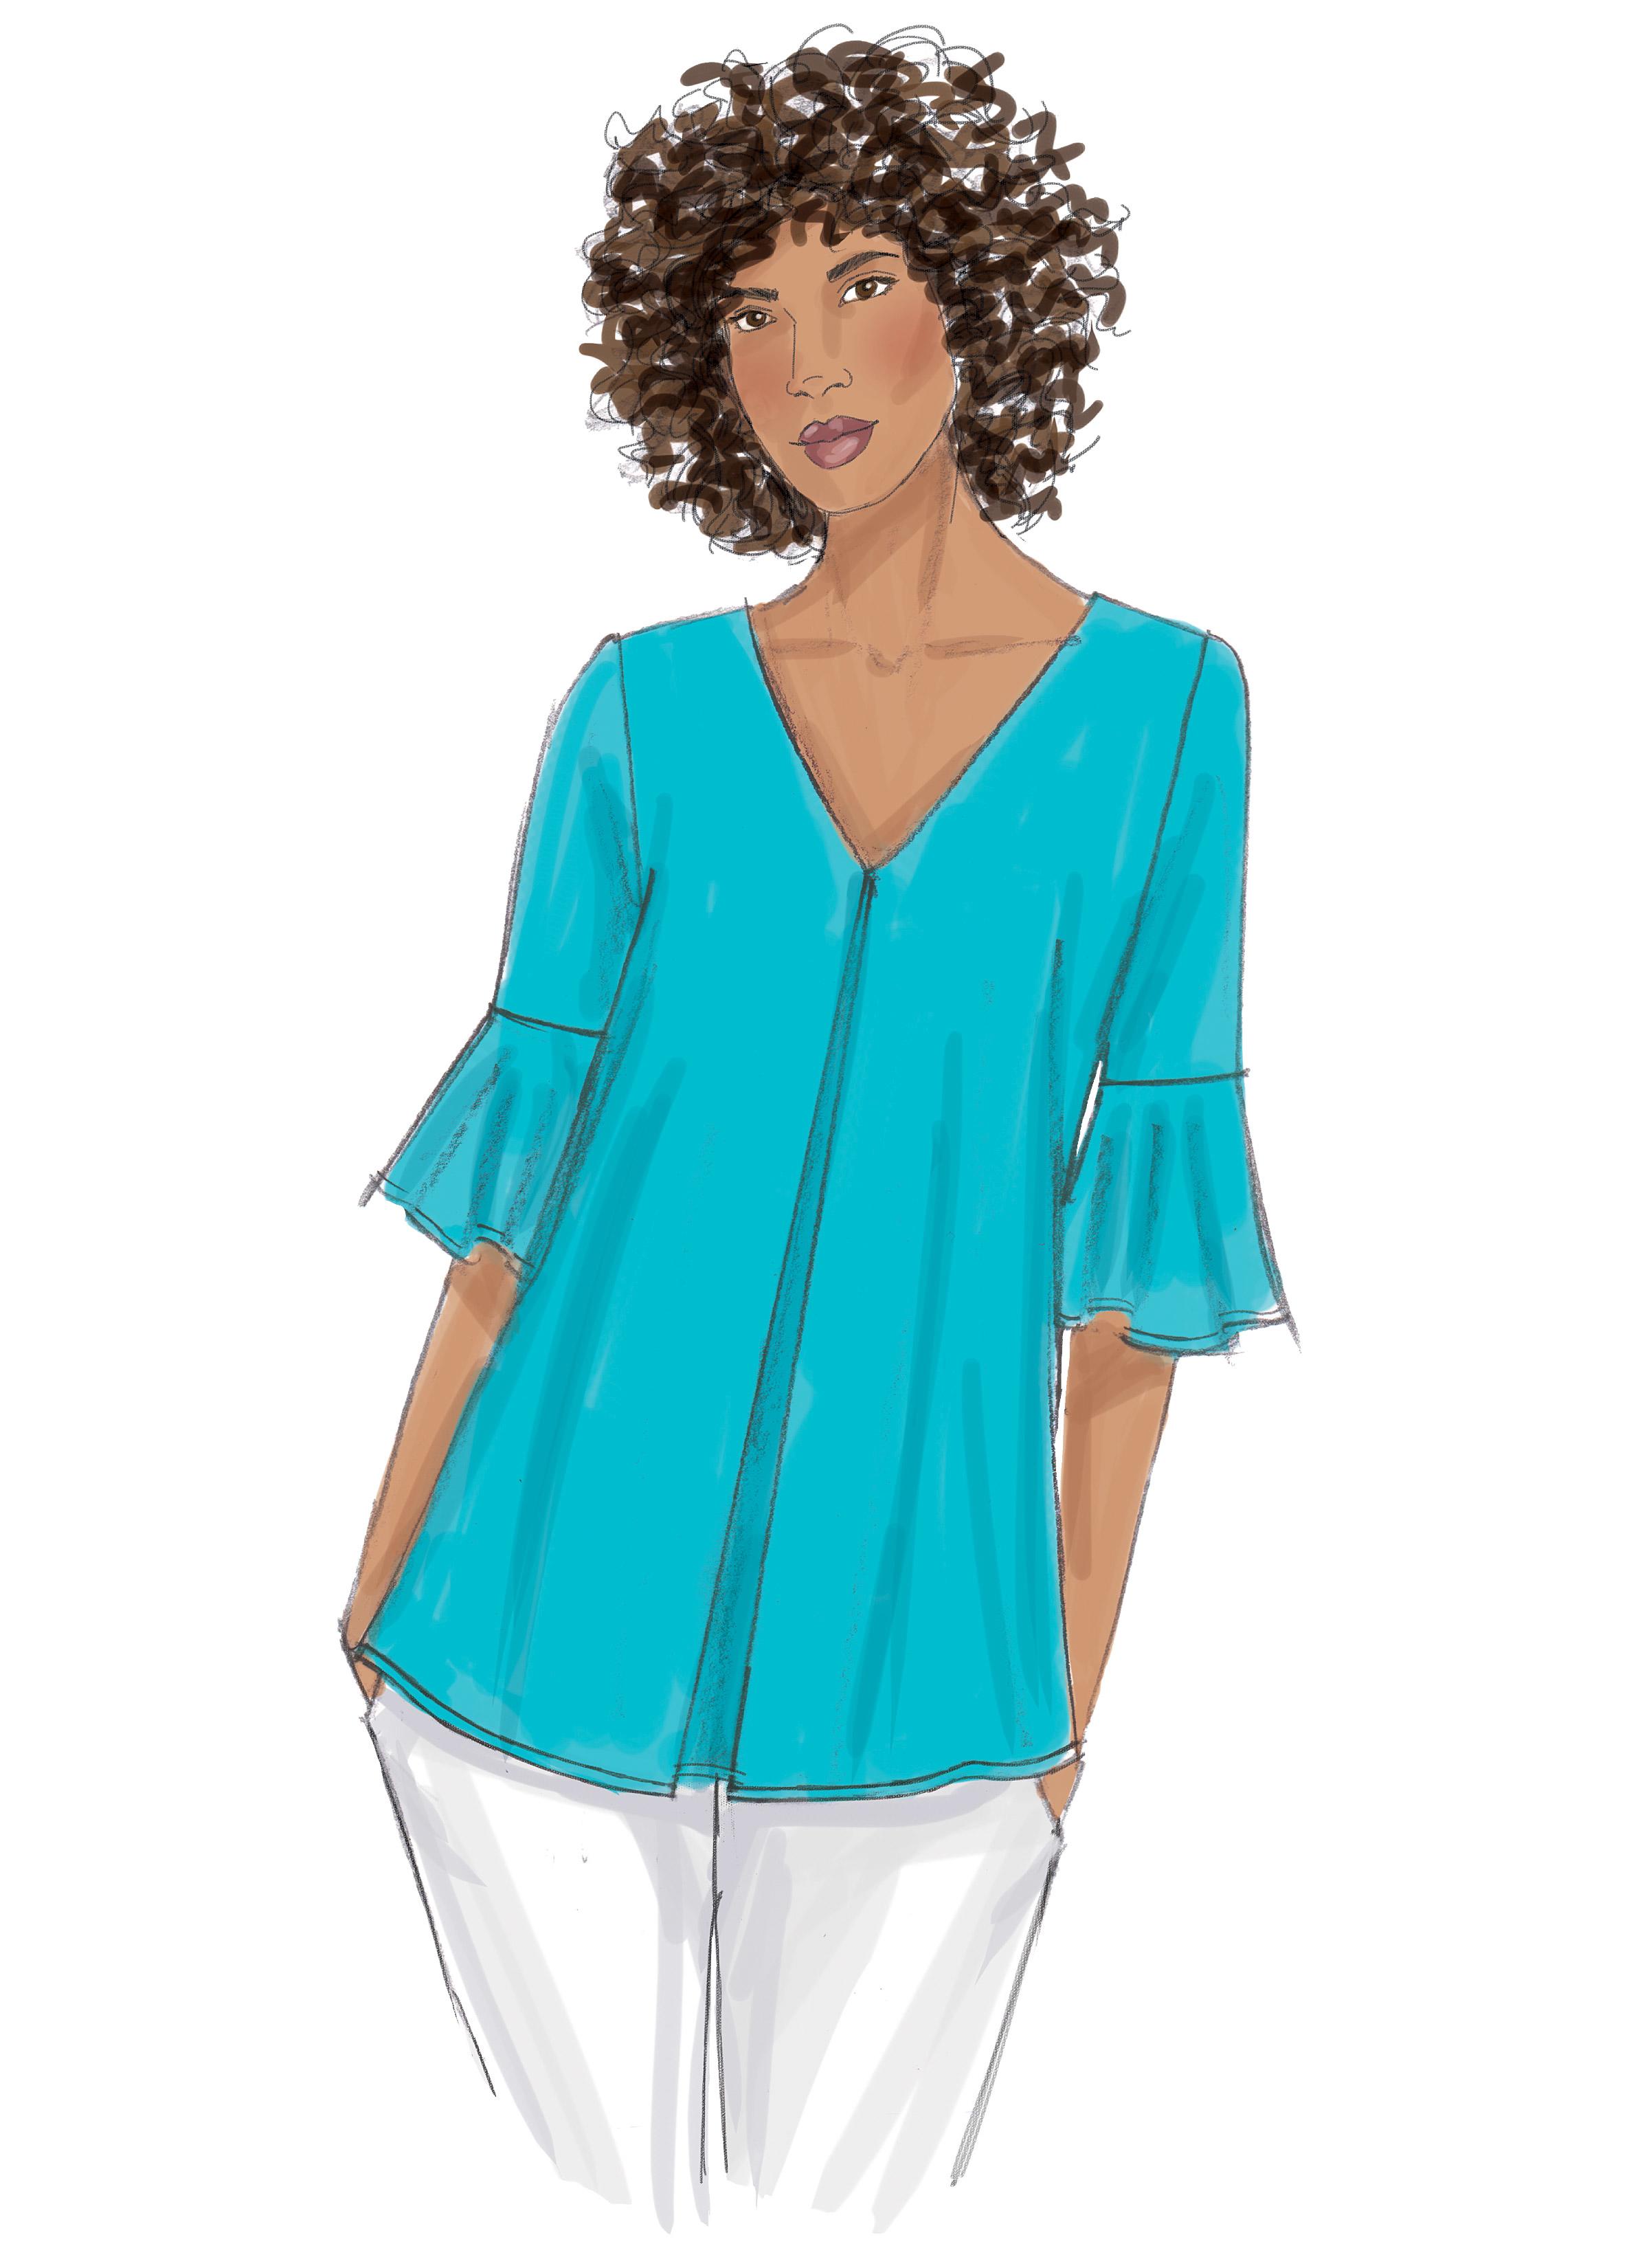 Butterick B6456 Misses' Tulip or Ruffle Sleeve Tops